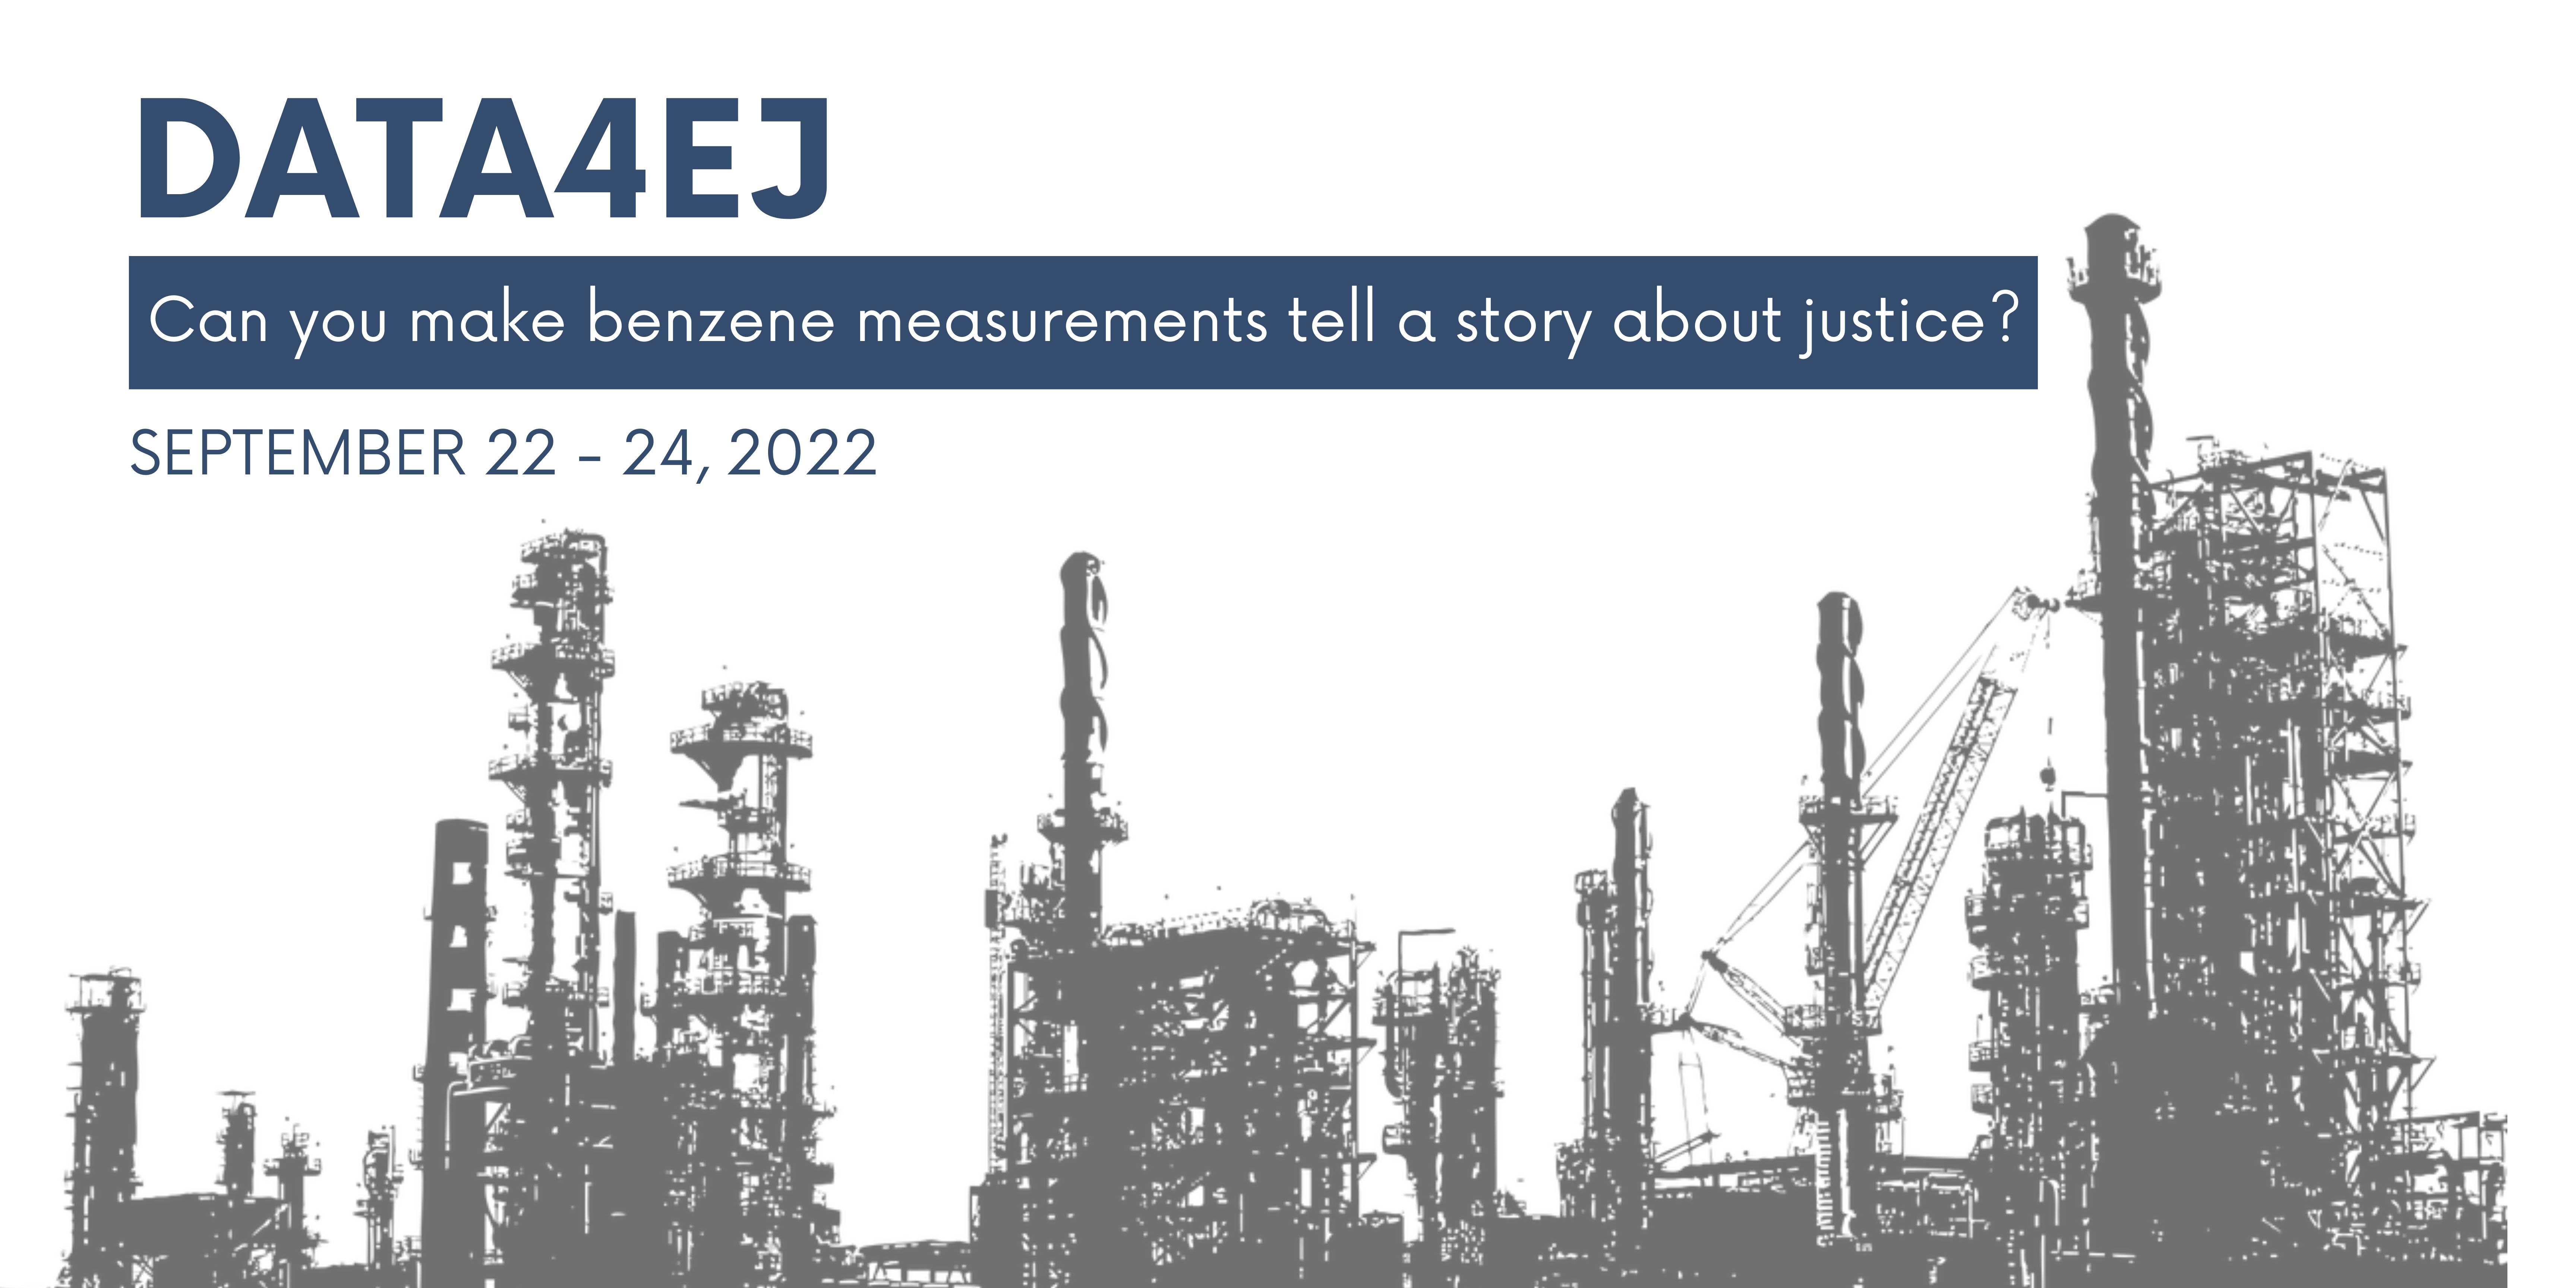 DATA4EJ - Can you make benzene measurements tell a story about justice? September 22-24, 2022